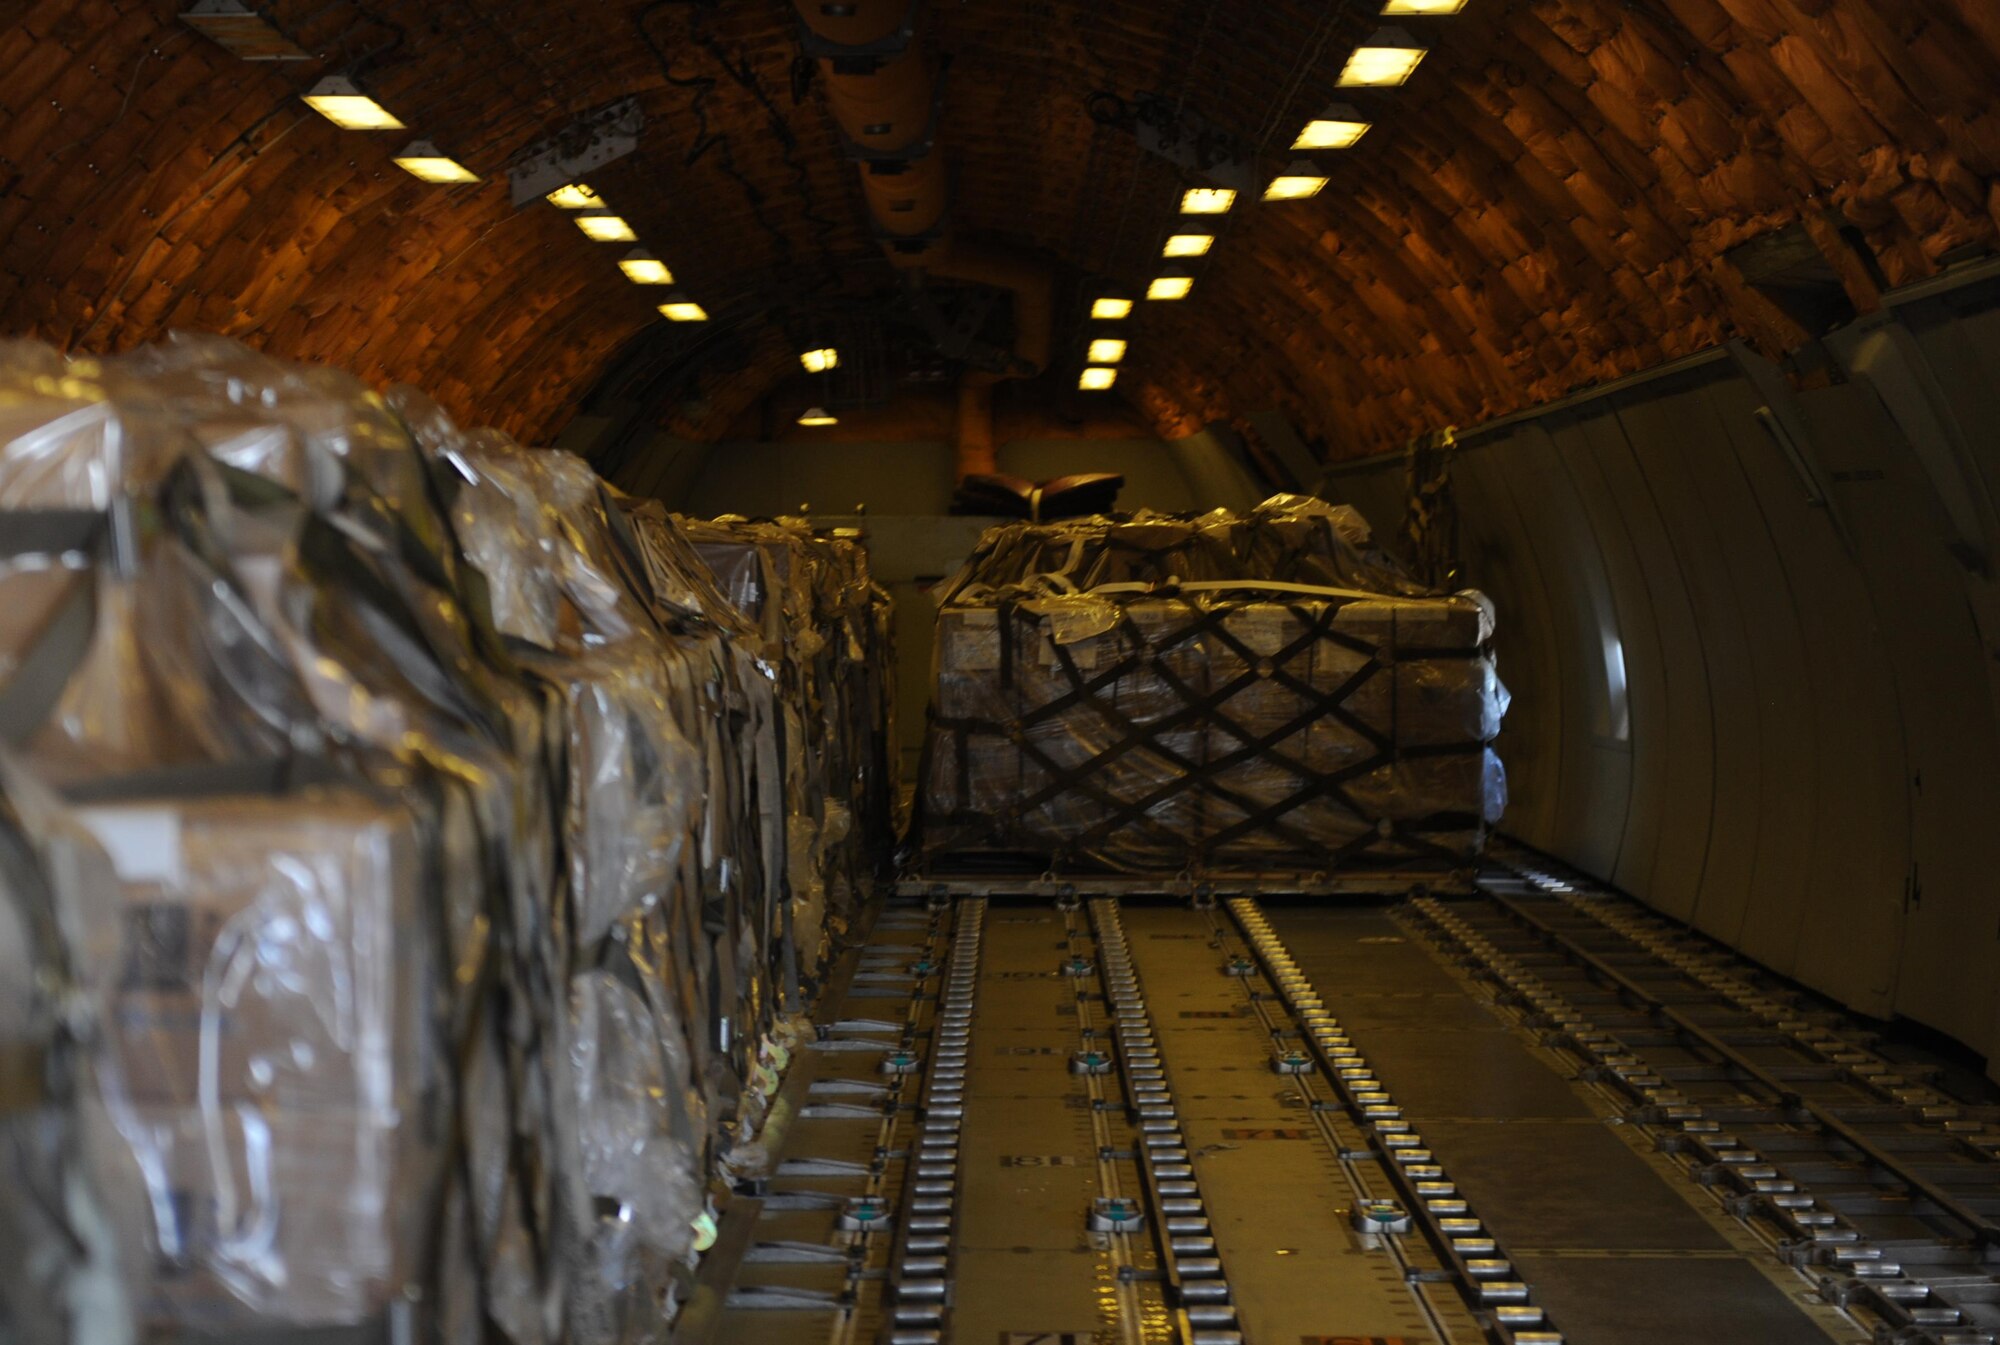 Packed fortified dehydrated food from Global Samaritan Resources are loaded onto a KC-10 Extender at Dyess Air Force Base, Texas, Sept. 20, 2016. Each serving of the food contained in these shipments contains the daily nutritional value for an average adult. (U.S. Air Force photo by Airman 1st Class Rebecca Van Syoc)